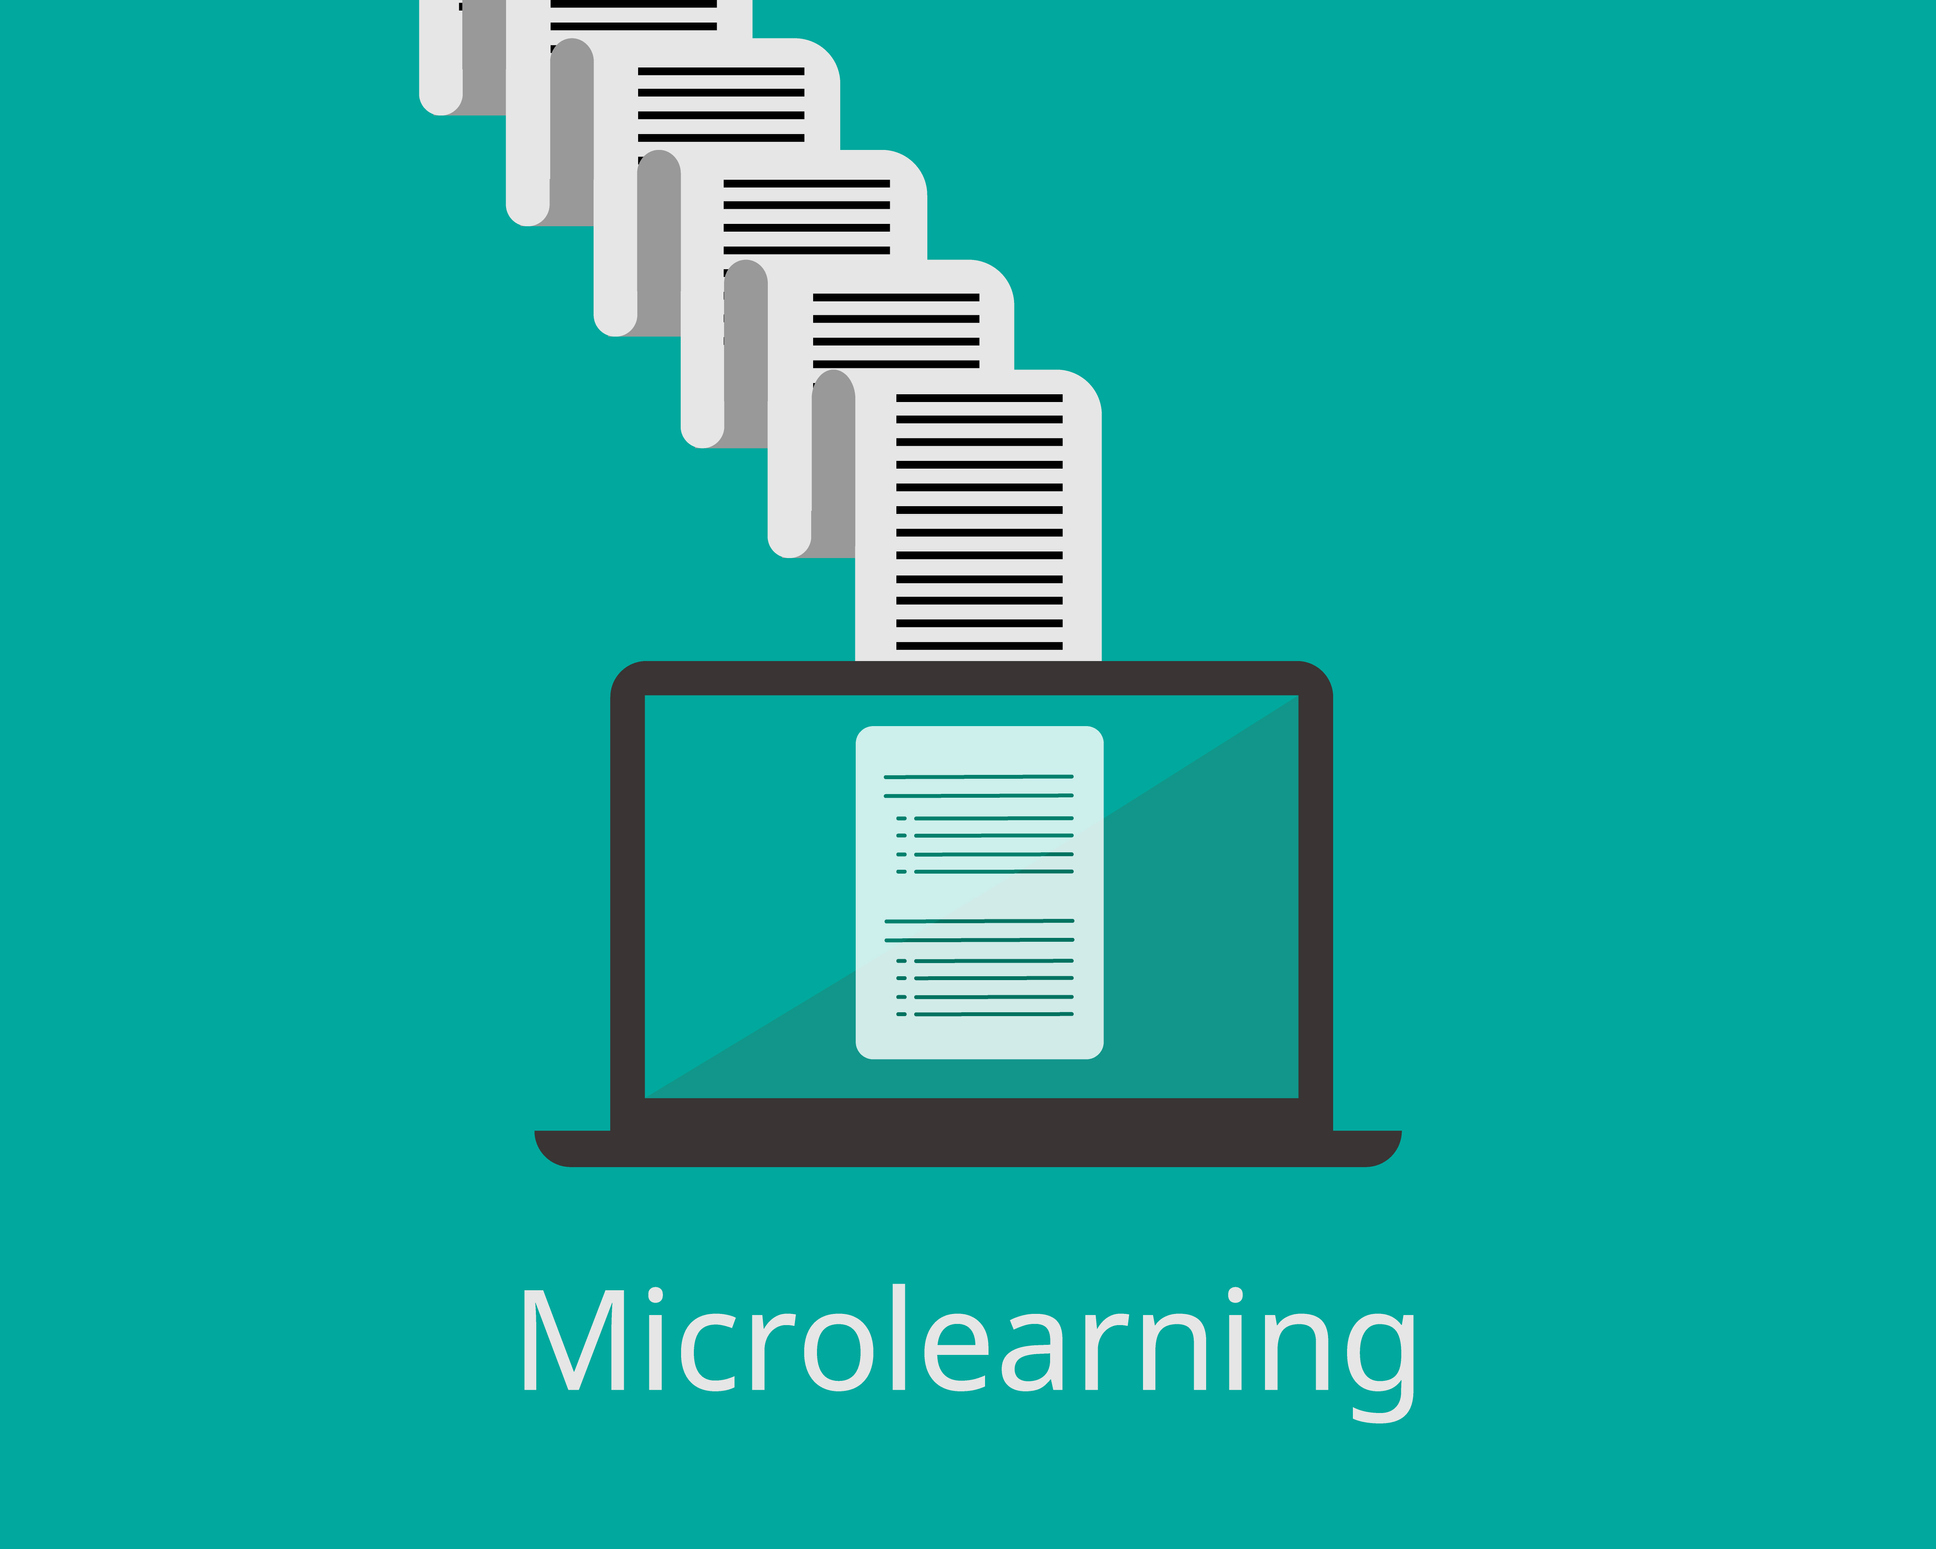 Microlearning: Overview, Benefits, and Examples